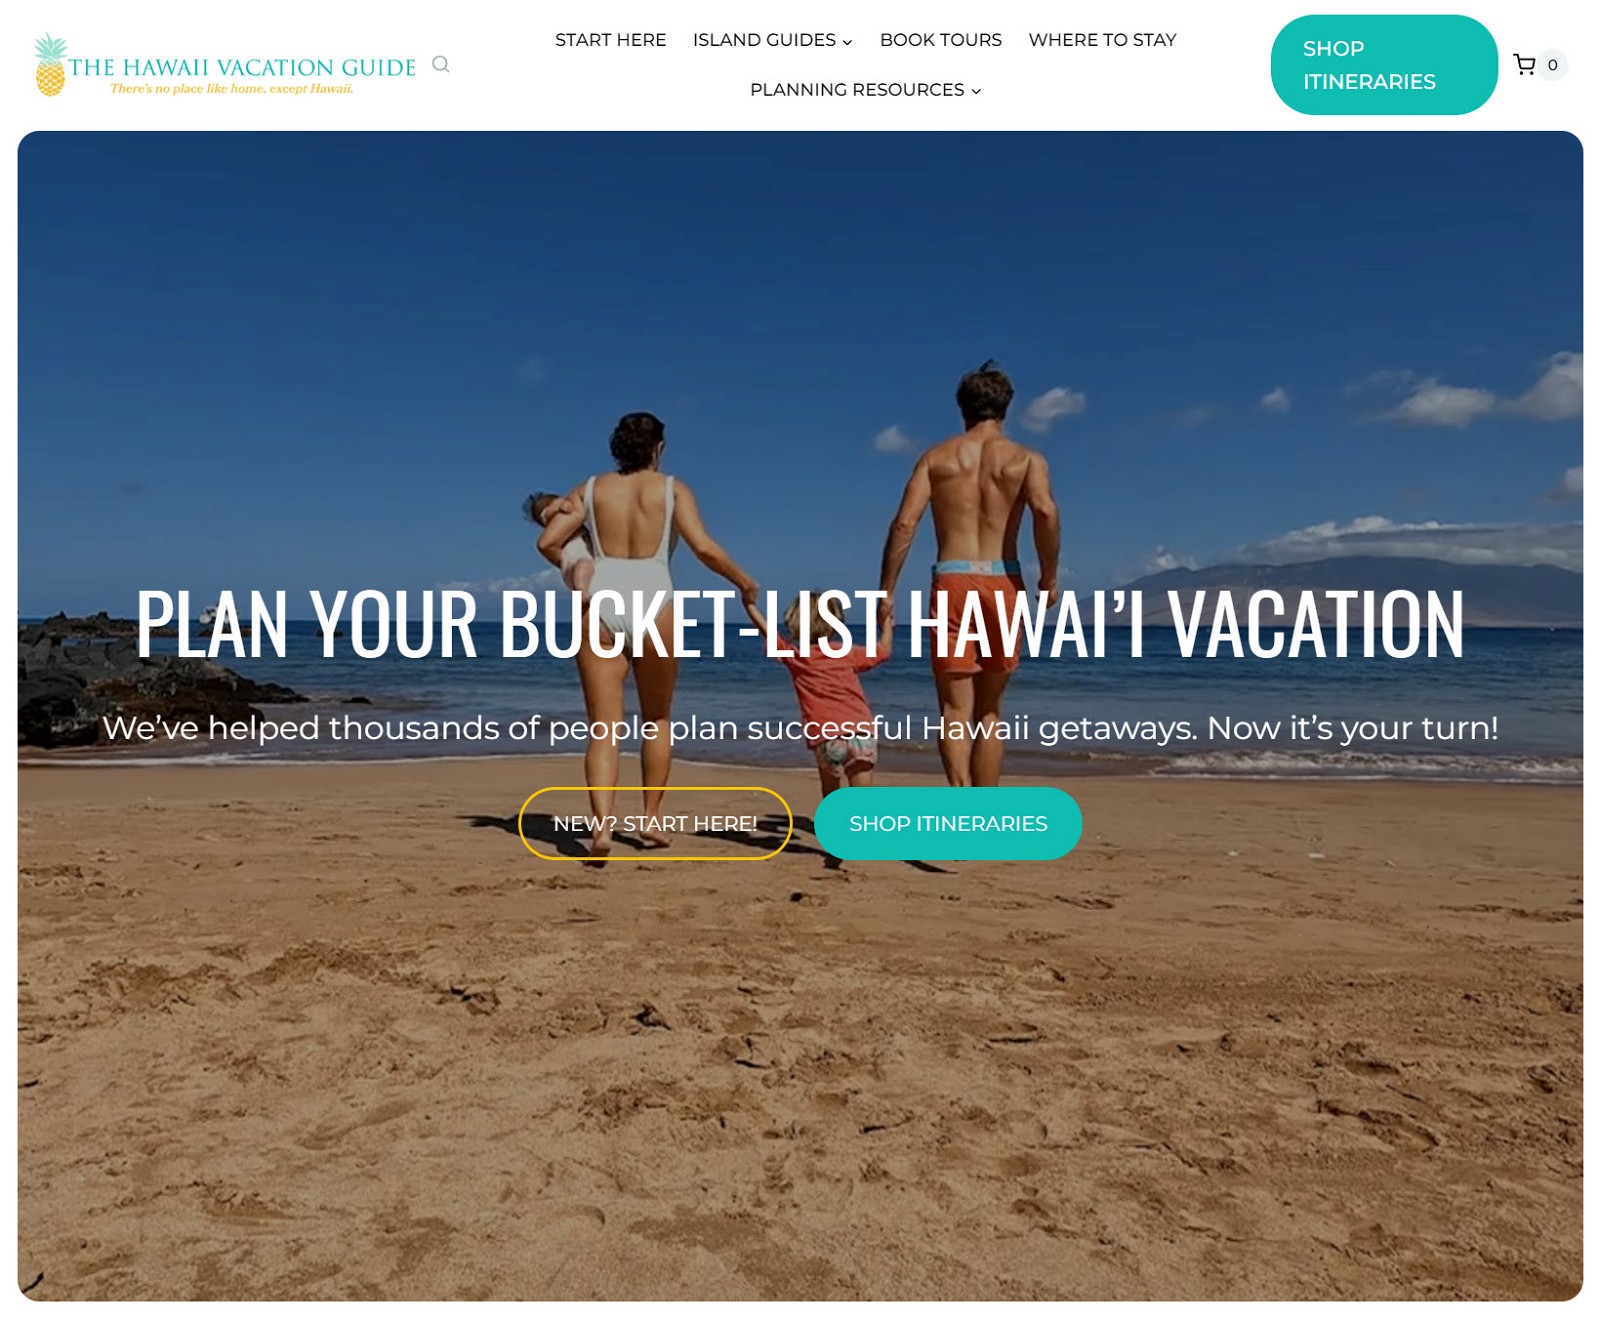 the hawaii vacation guide homepage